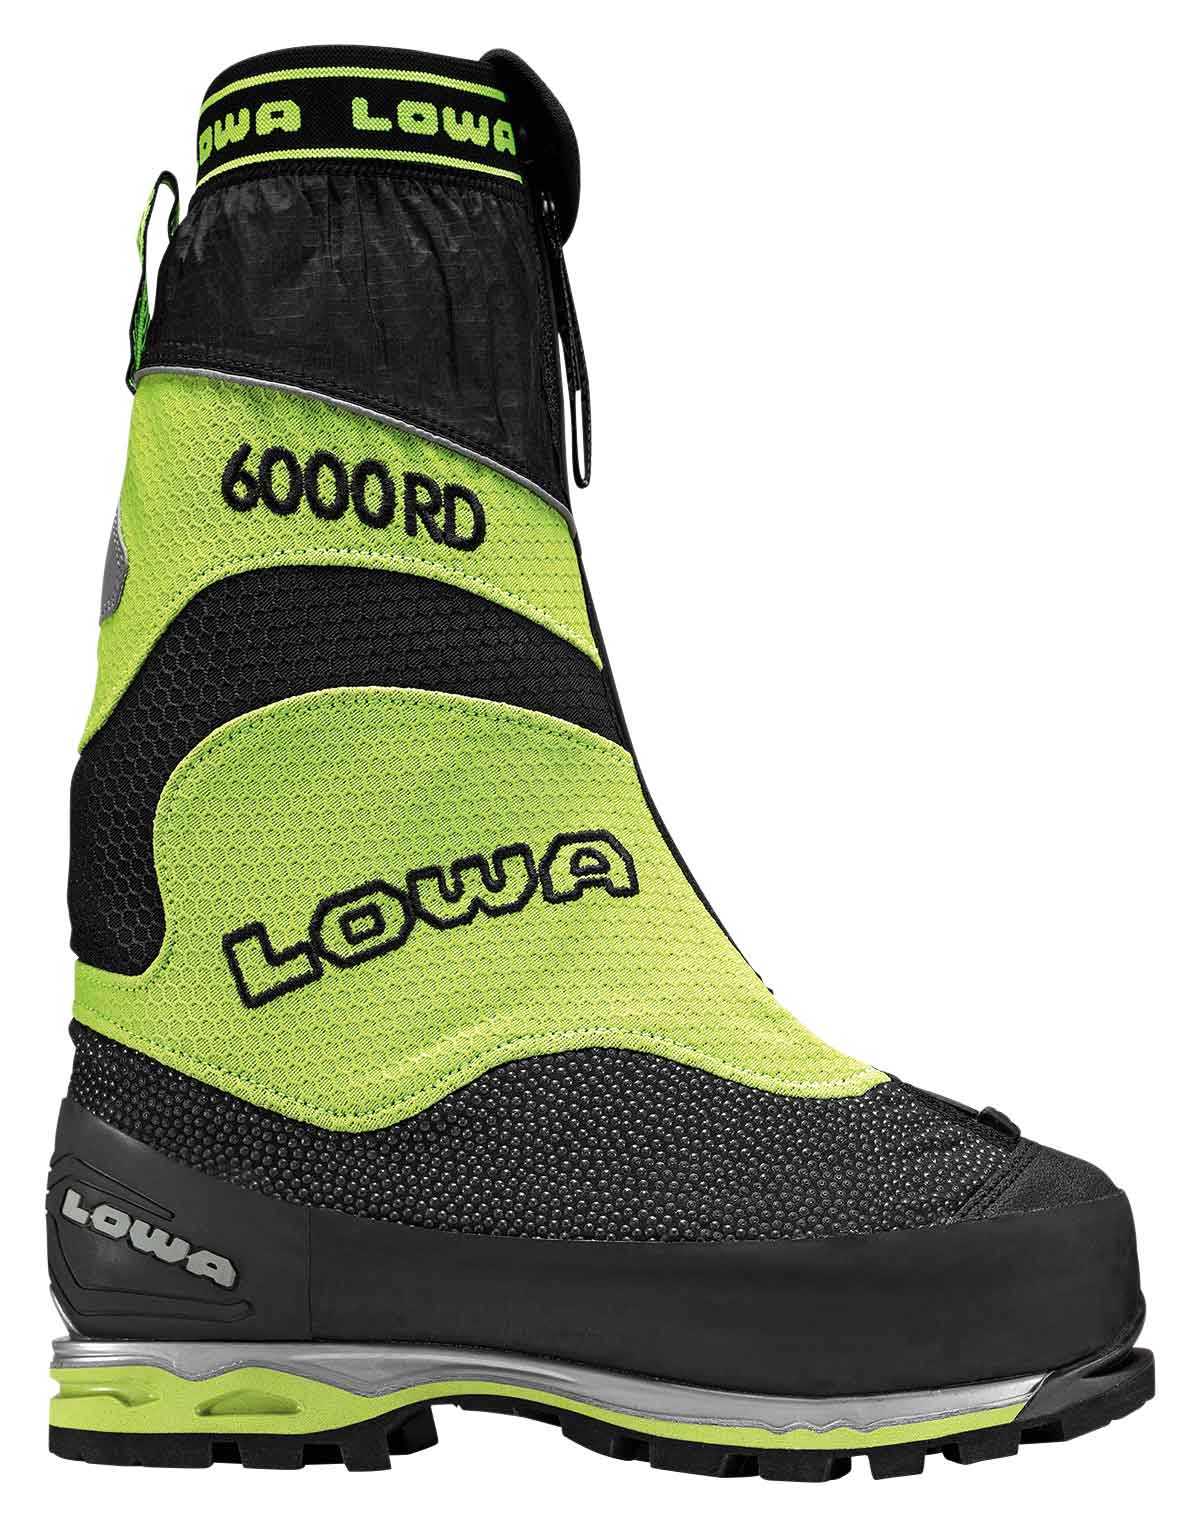 Lowa Expedition 6000 Evo RD - Horolezecké boty | Hardloop